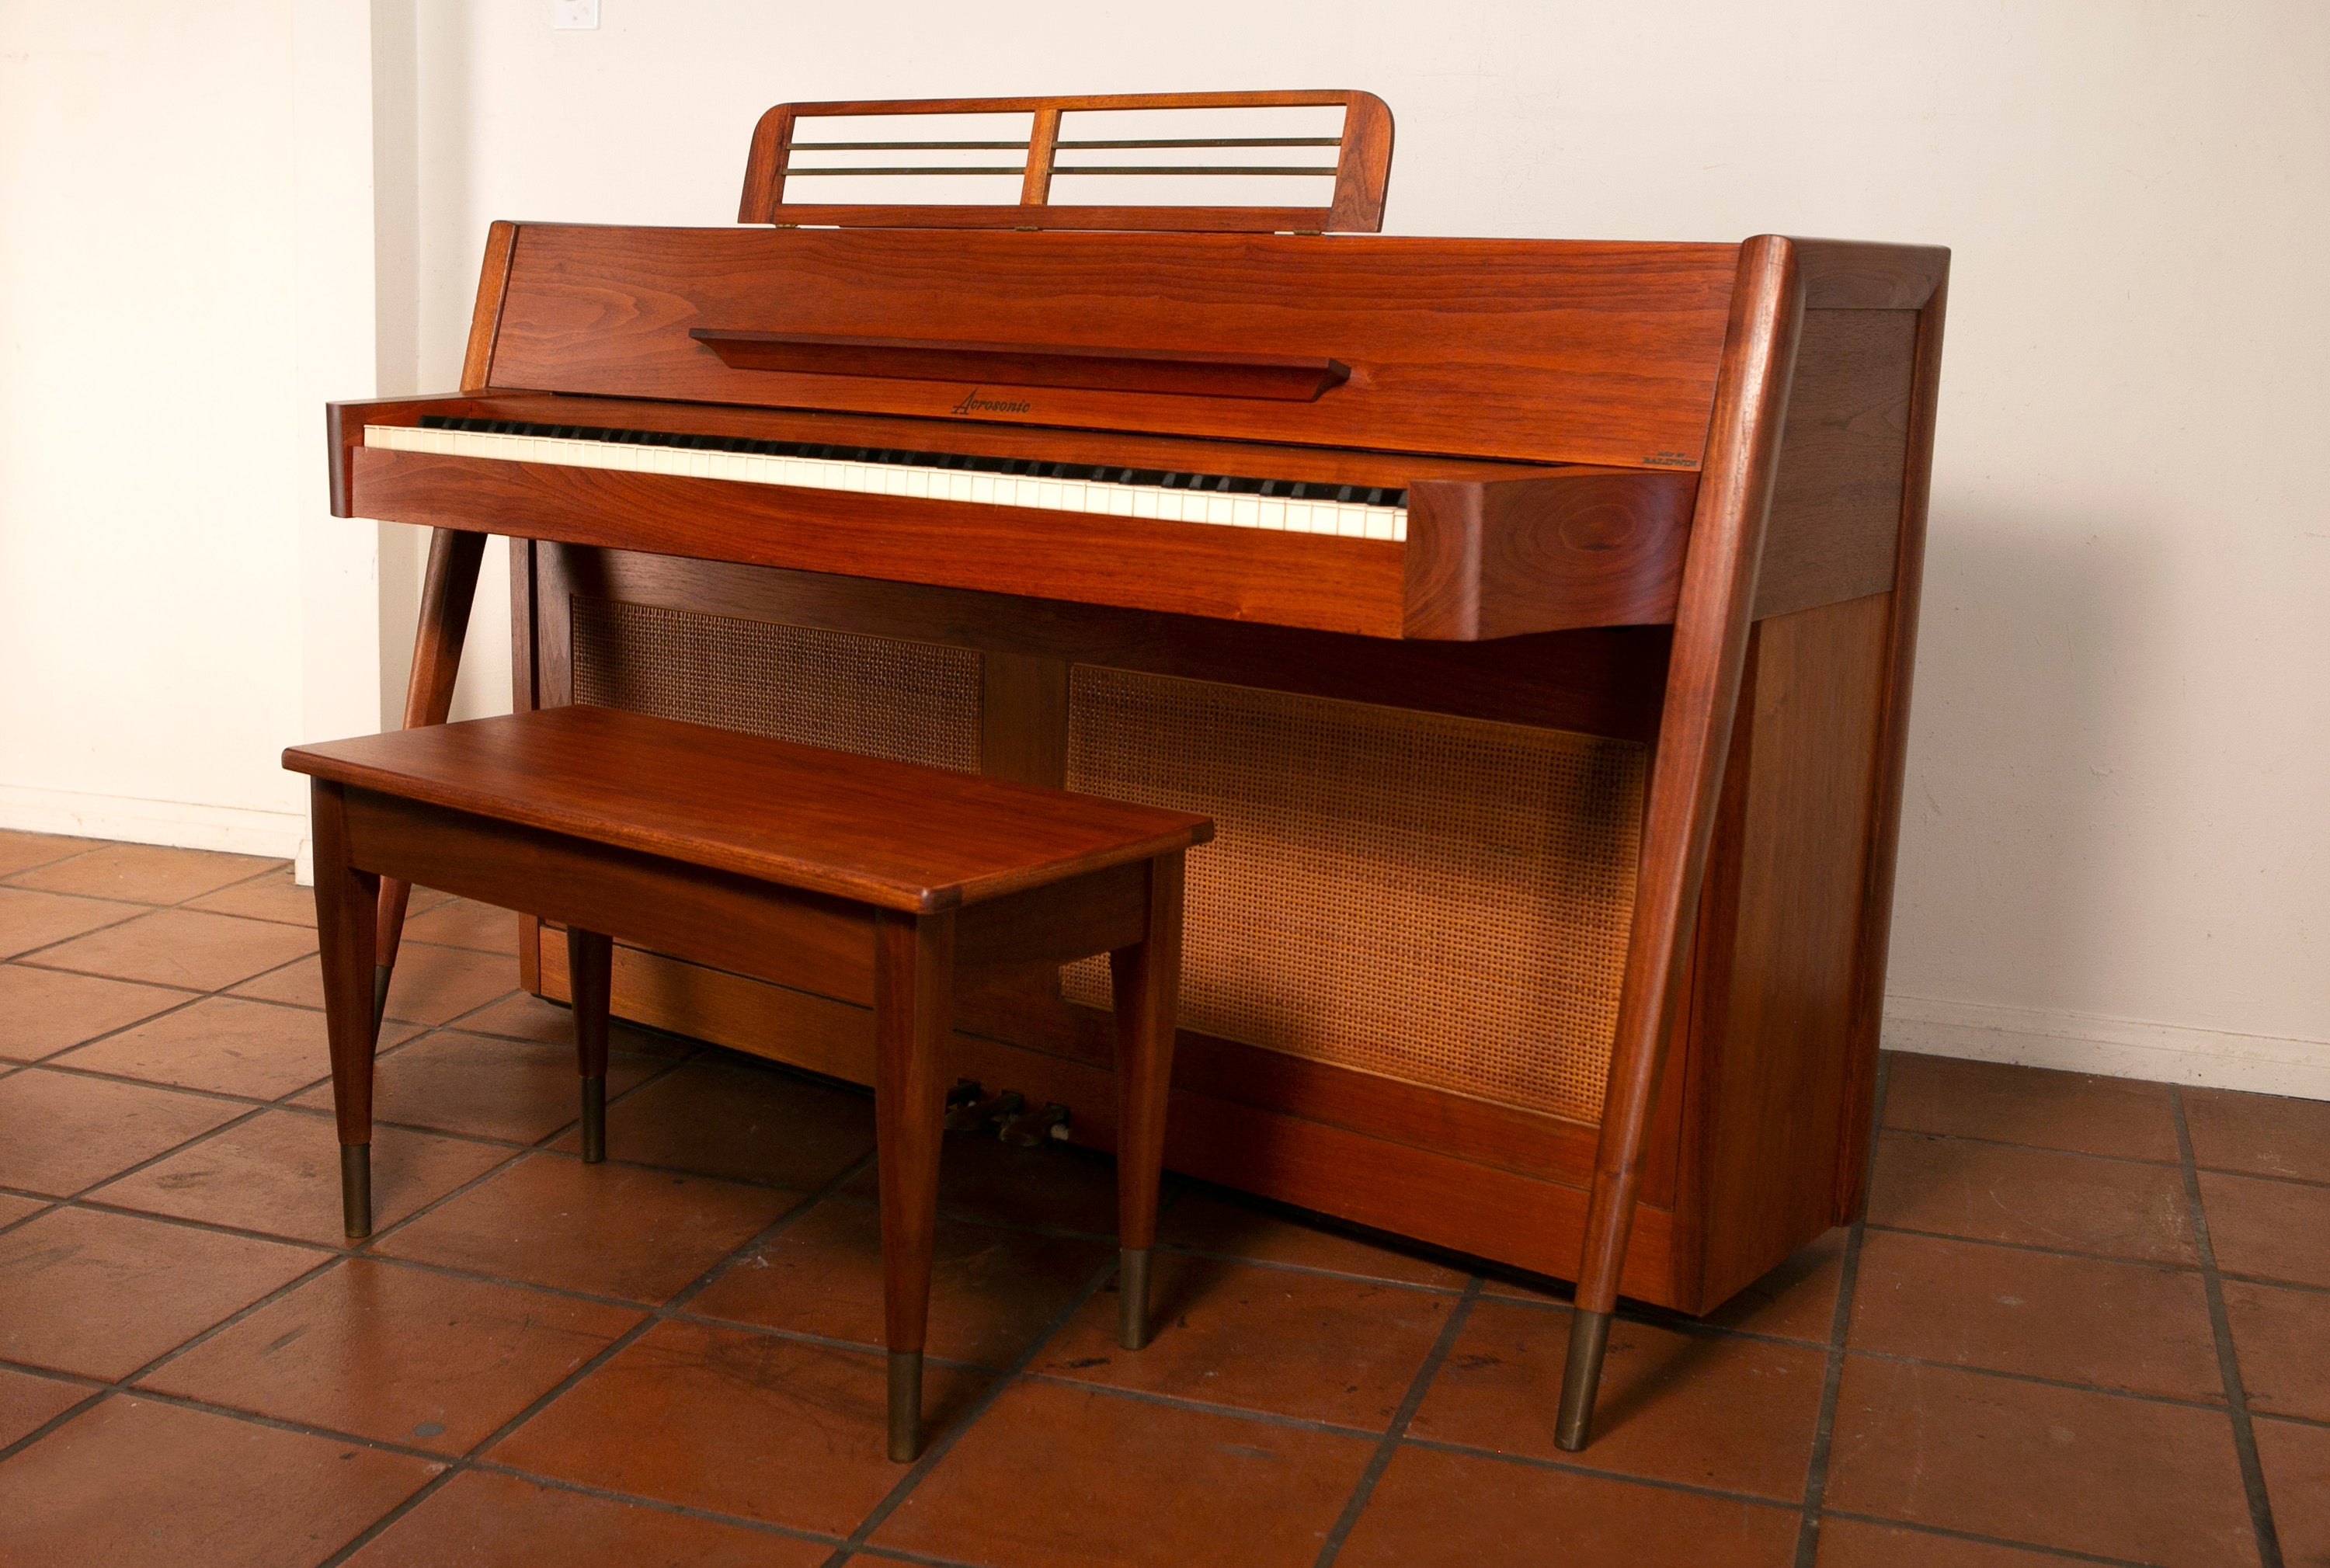 Mid-Century Modern Baldwin Acrosonic Piano with bench in Walnut + Caning, 1960s

This Mid-Century Modern Acrosonic spinet piano made by Baldwin is very sought after and is an amazing addition to any home. It's signature Danish style modern tapered